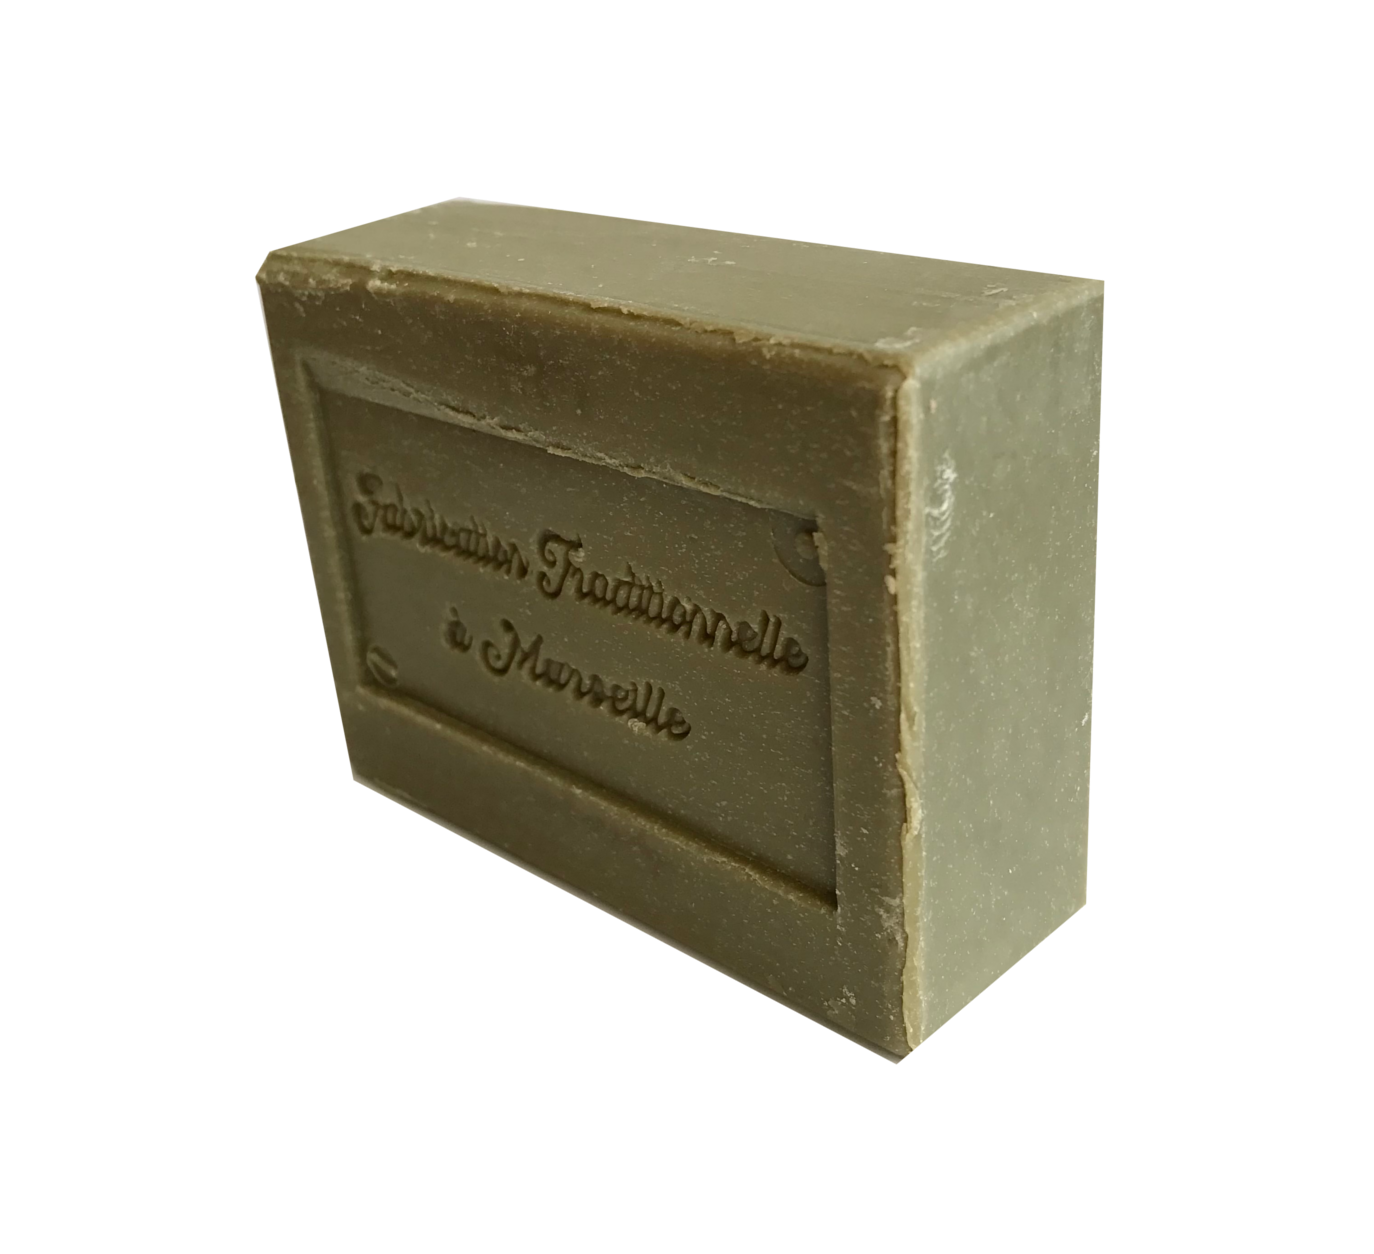 A rectangular bar of olive green soap imprinted with fabrication traditionnelle a marseille